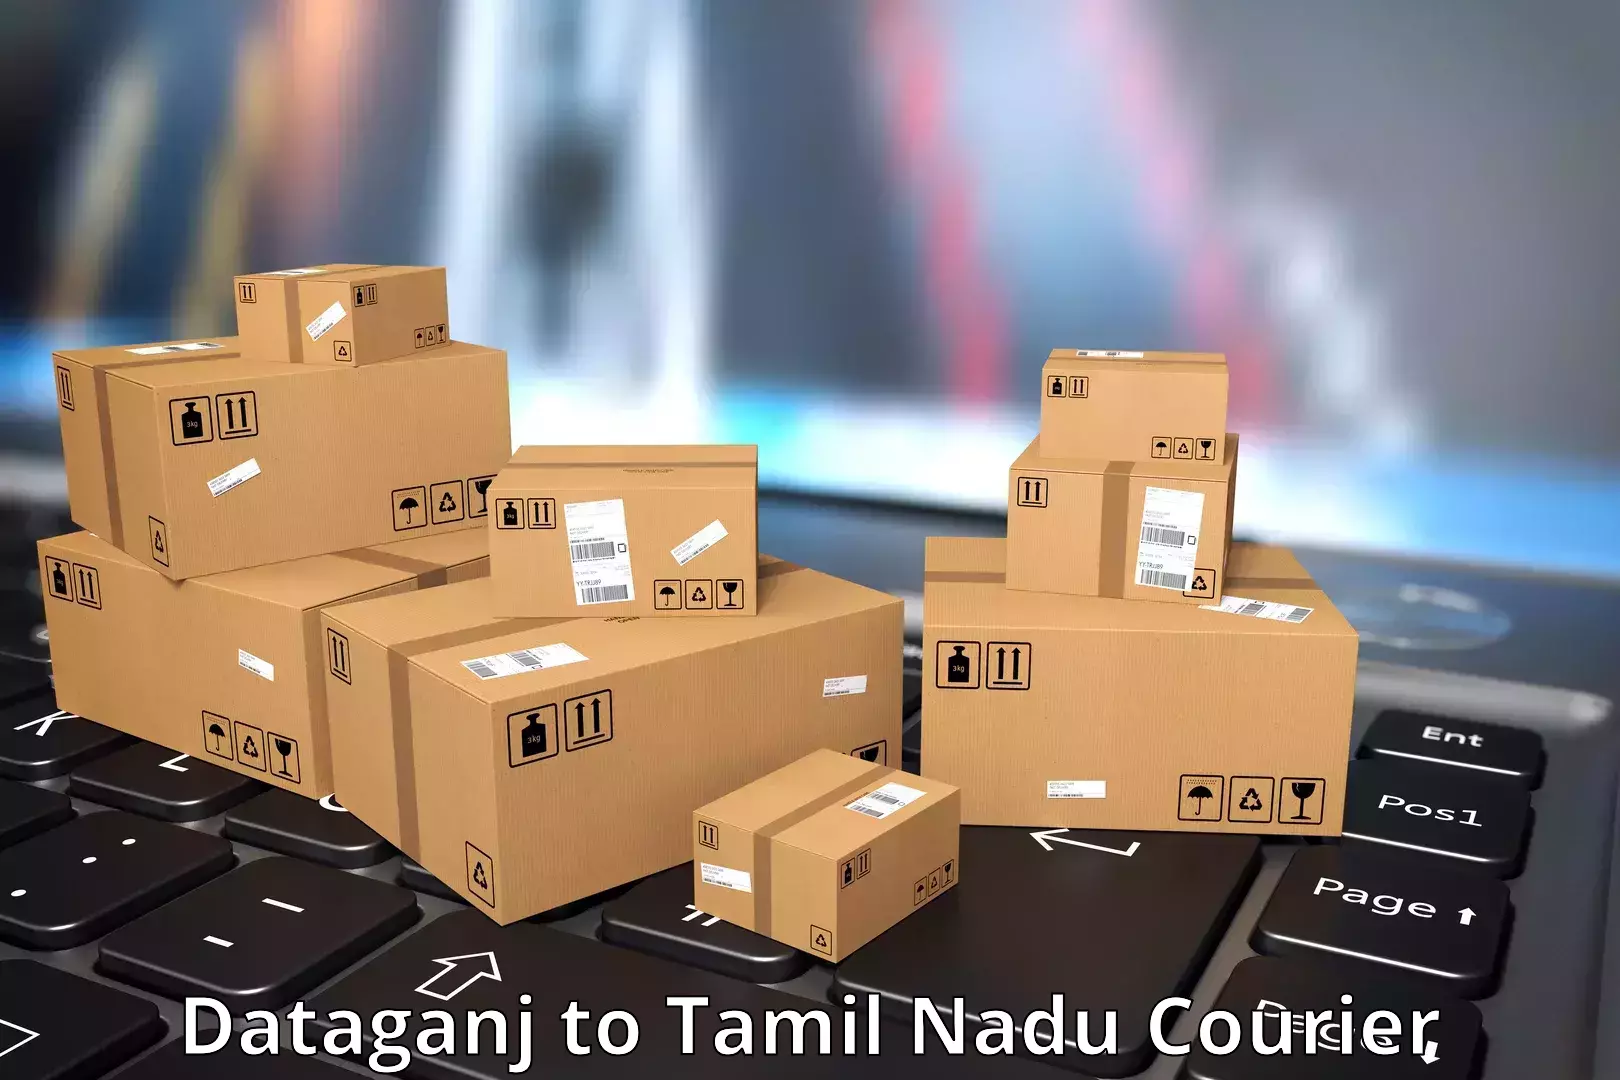 On-demand shipping options in Dataganj to Tamil Nadu